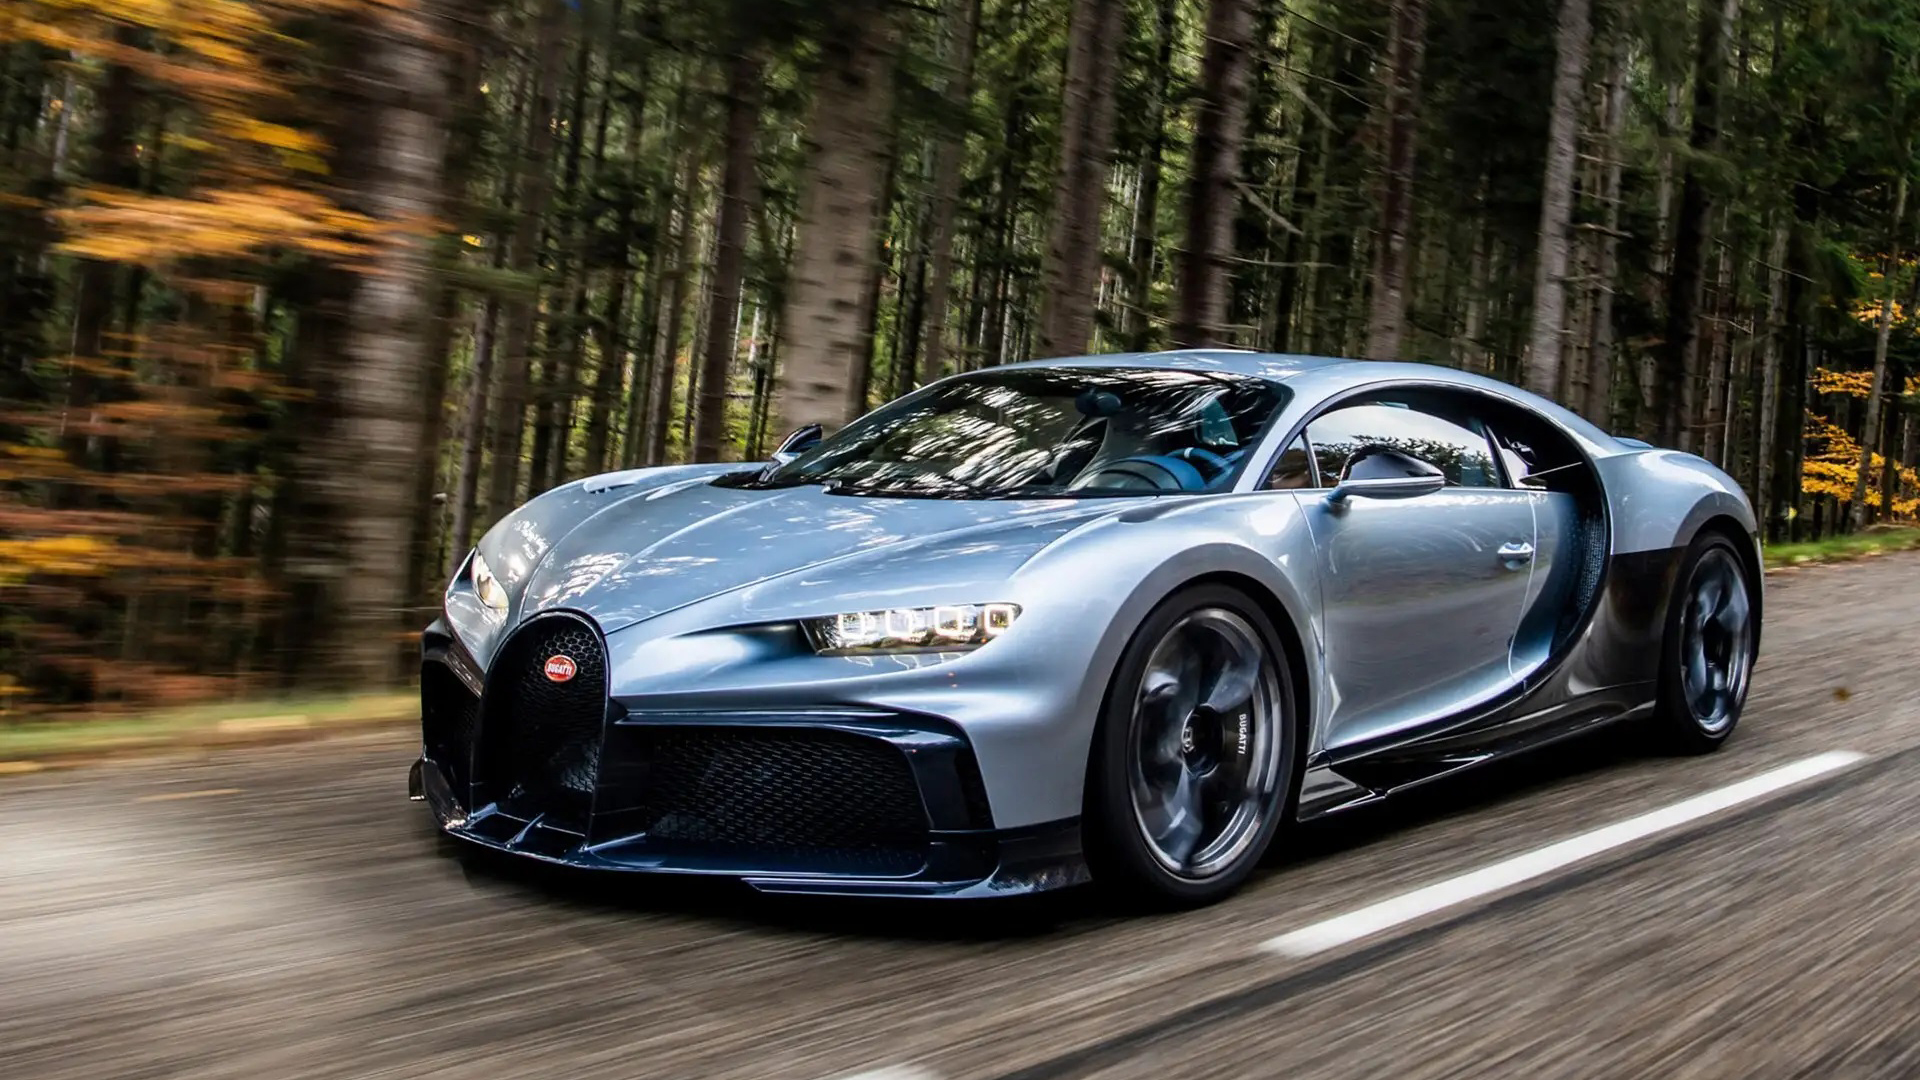 The Bugatti Chiron Profilée is an unusual model, which was not intended to be sold because the quota of 500 cars scheduled for production had already been met